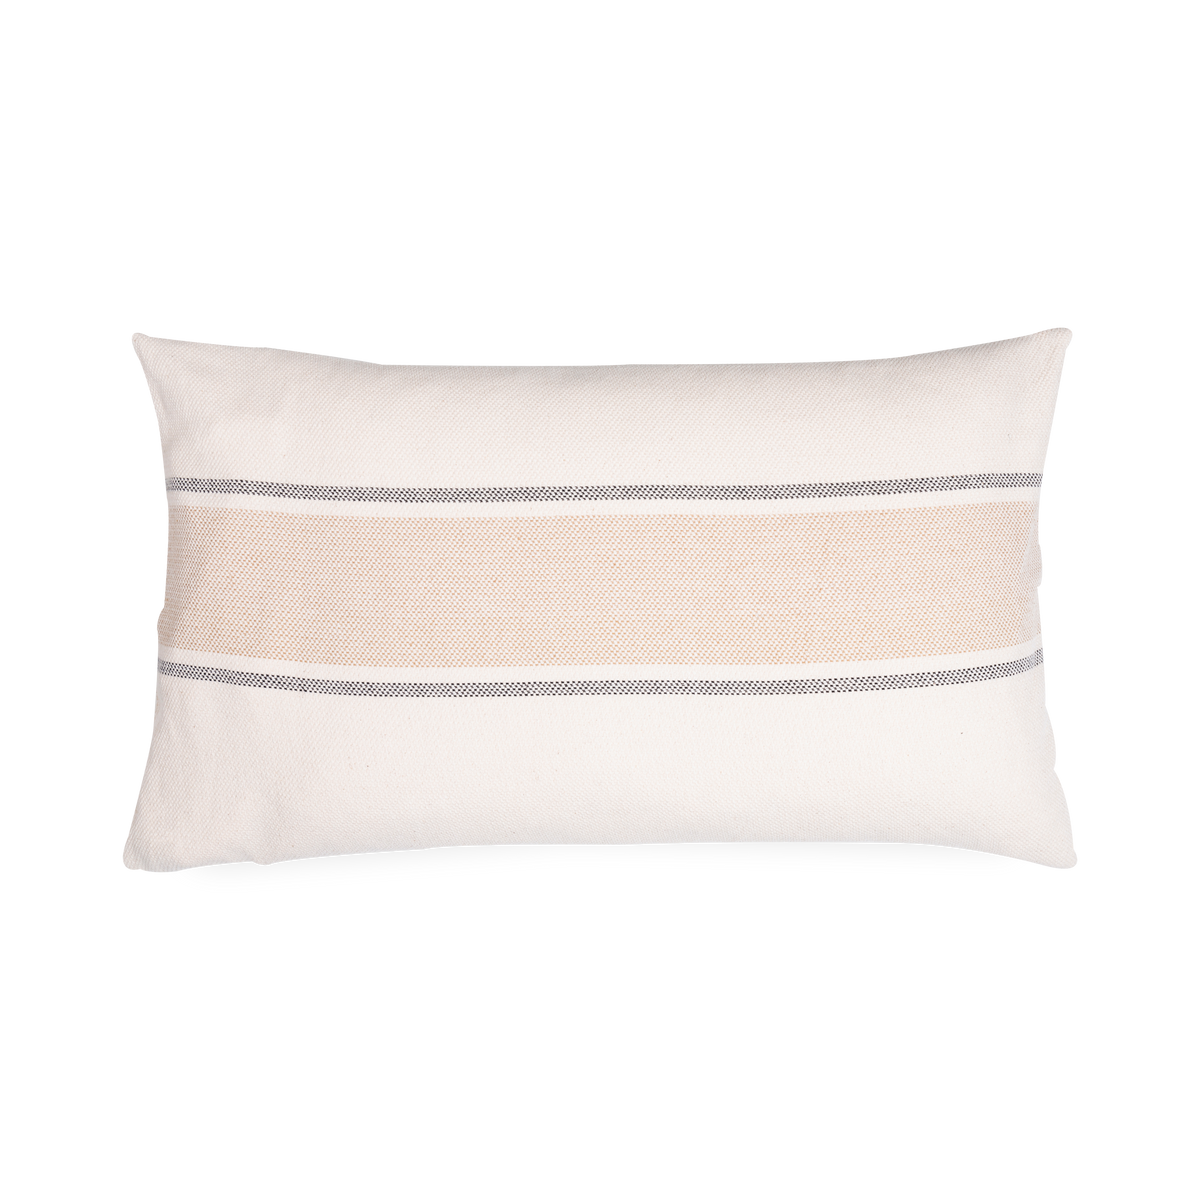 Providing a welcoming textural appeal to your seating or bedding collection, the Salinas Cotton Pillow uses a garment washed cotton to provide an exceptionally soft texture.